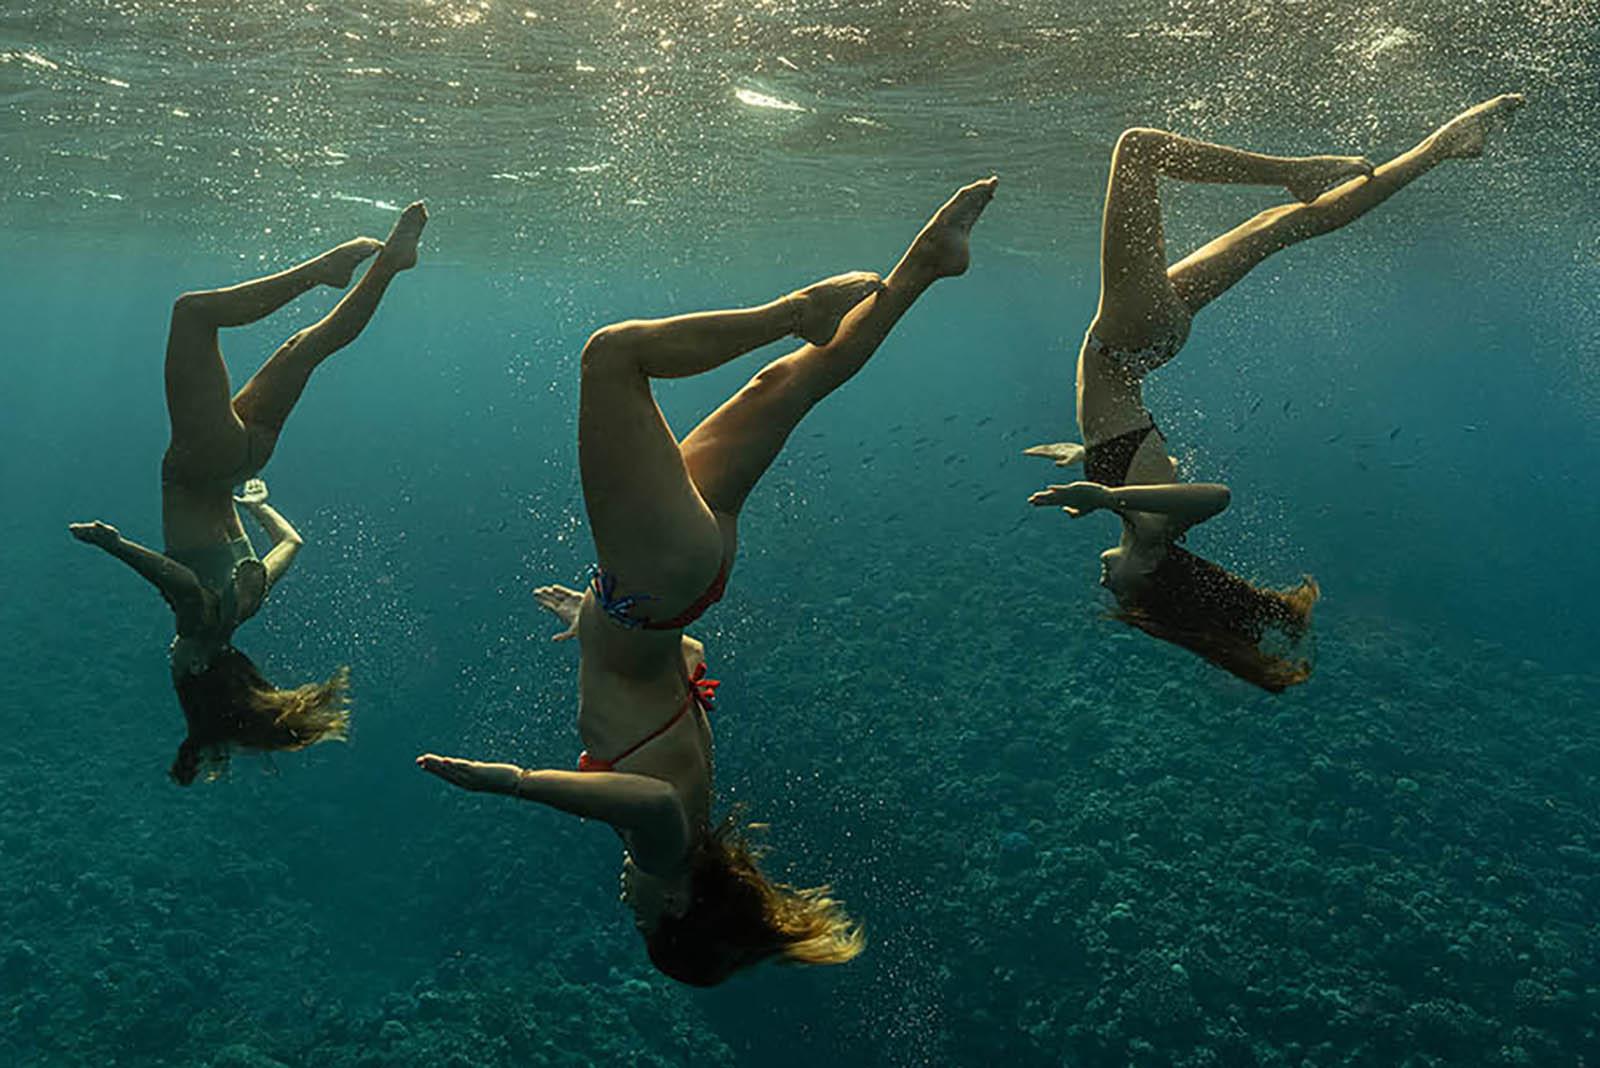 Synchronised swimming in the Blue - Fine art print, Color underwater photography - Contemporary Photograph by Olivier Borde